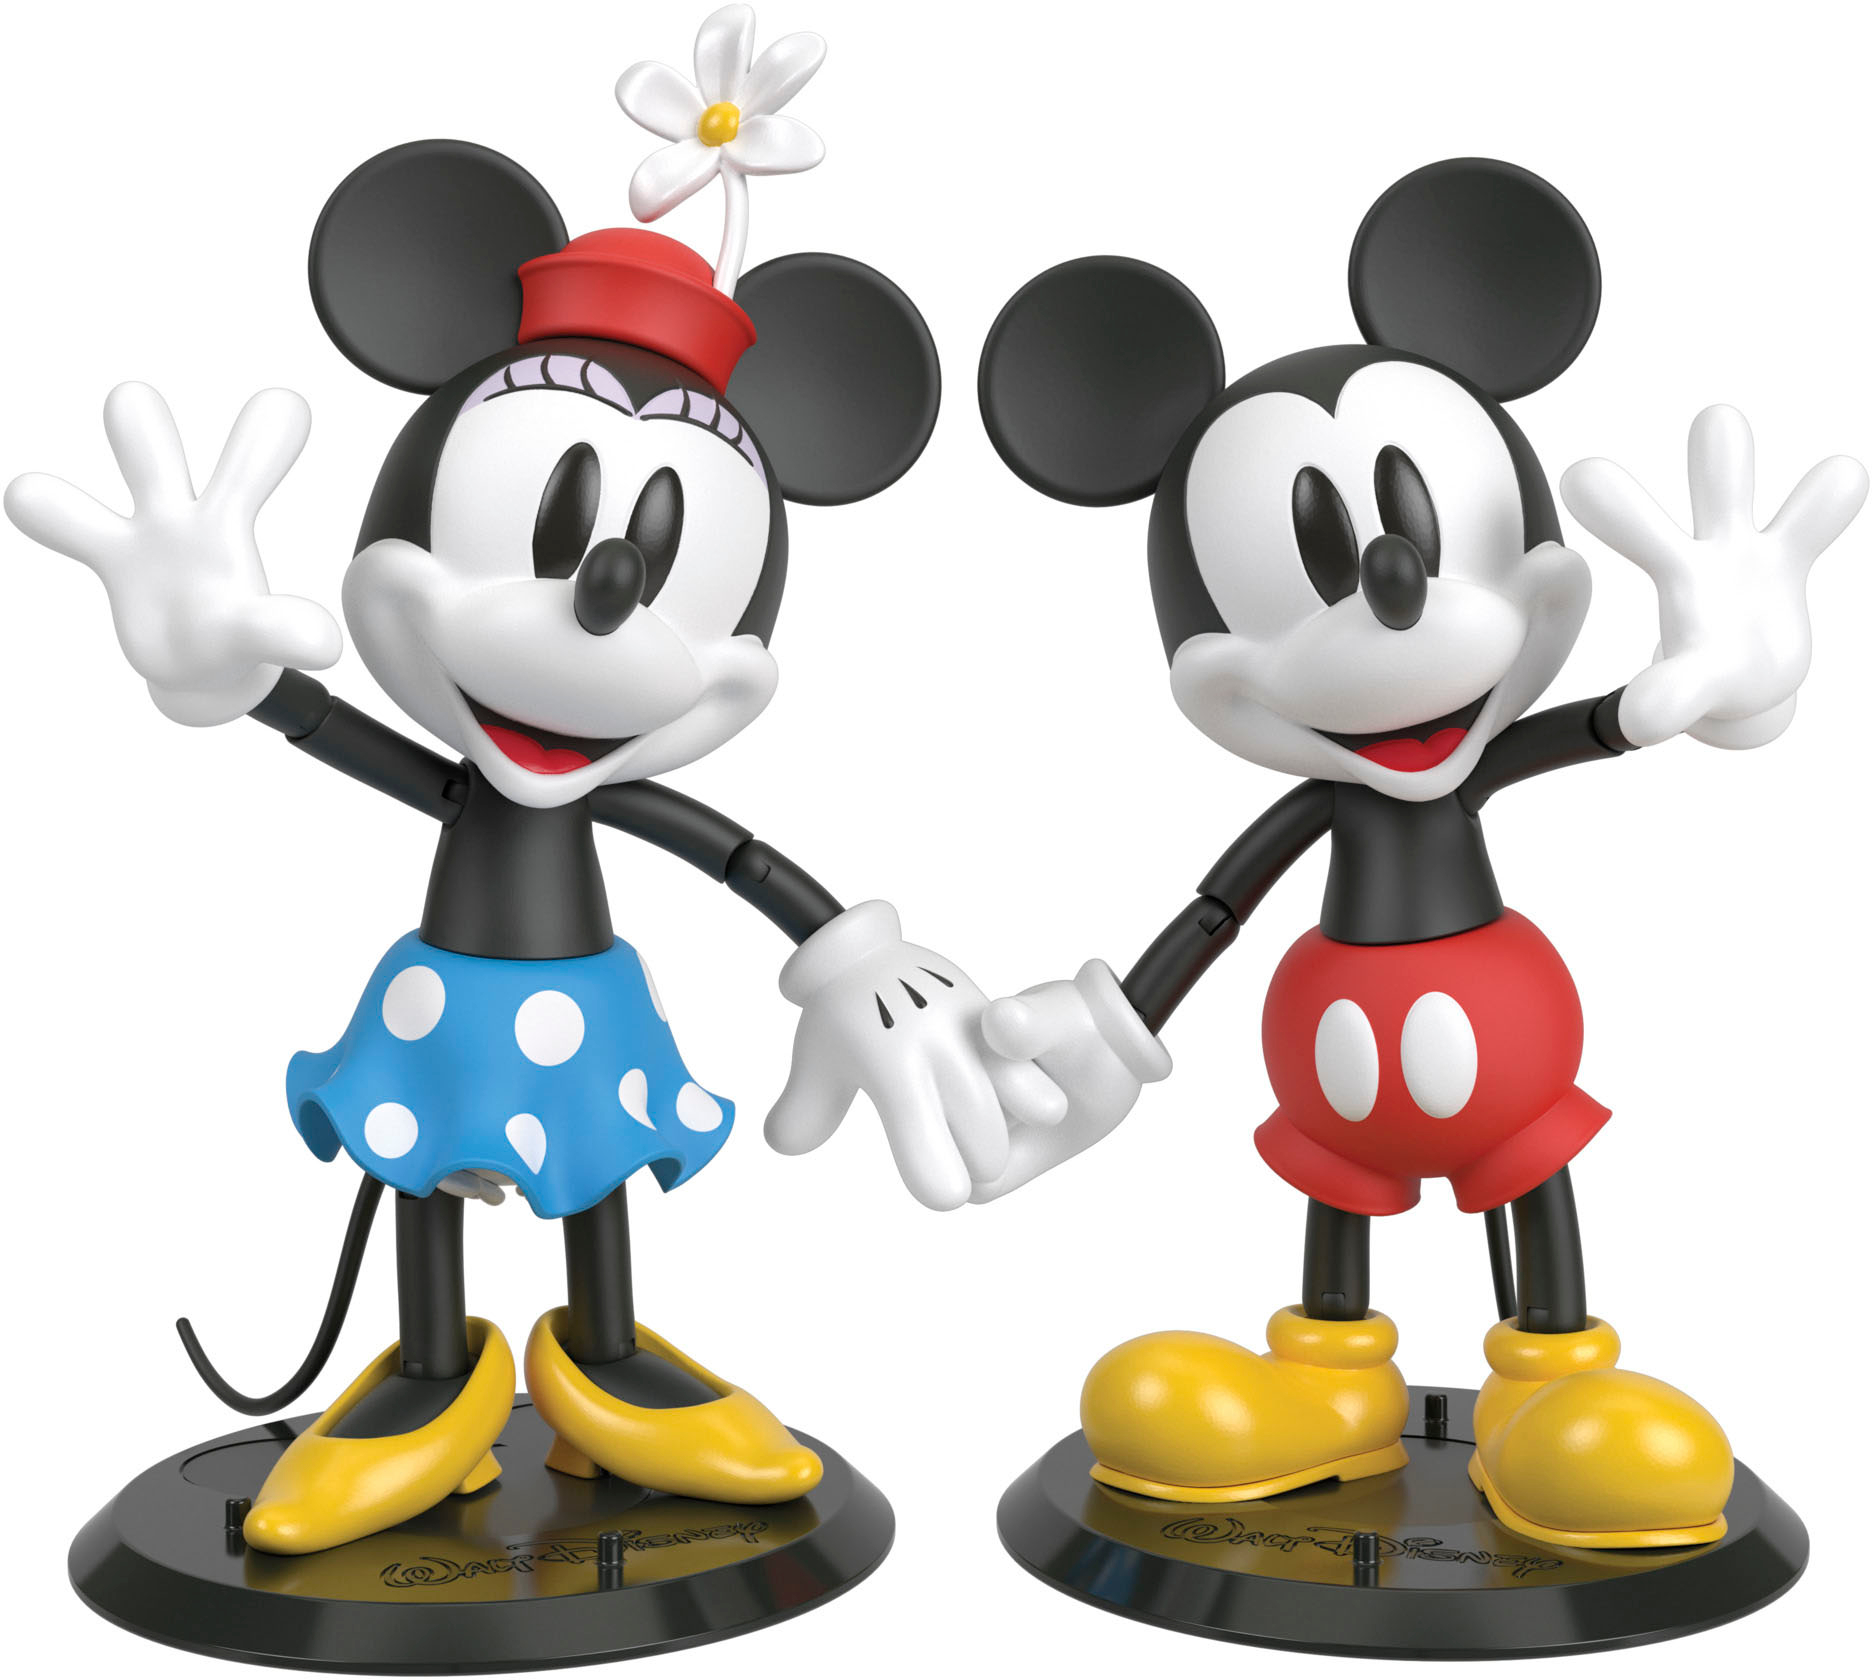 Disney 100 Collectible Action Figures Mickey and Minnie Mouse, Posable  Characters, Swappable Head & Hands, Soft Good Elements